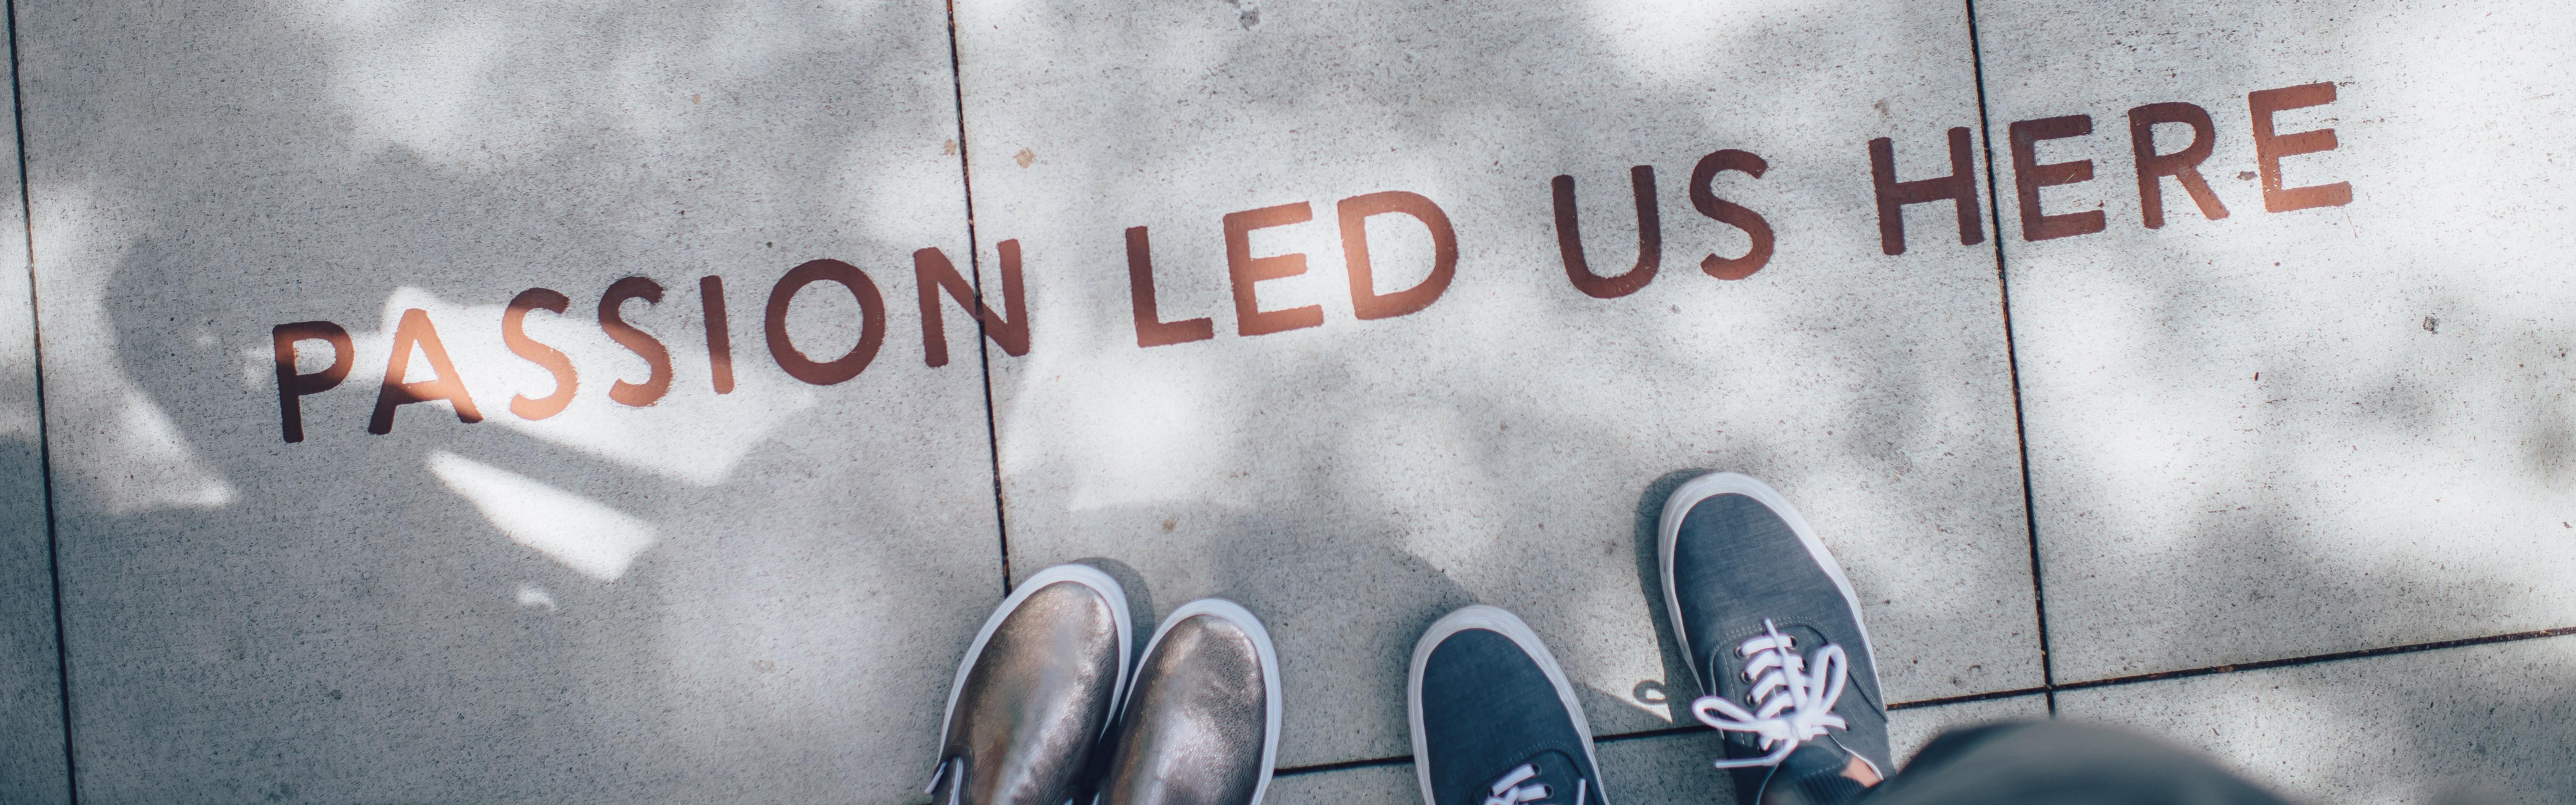 Photograph of two people's feet and concrete floor with slogan 'Passion led us here'